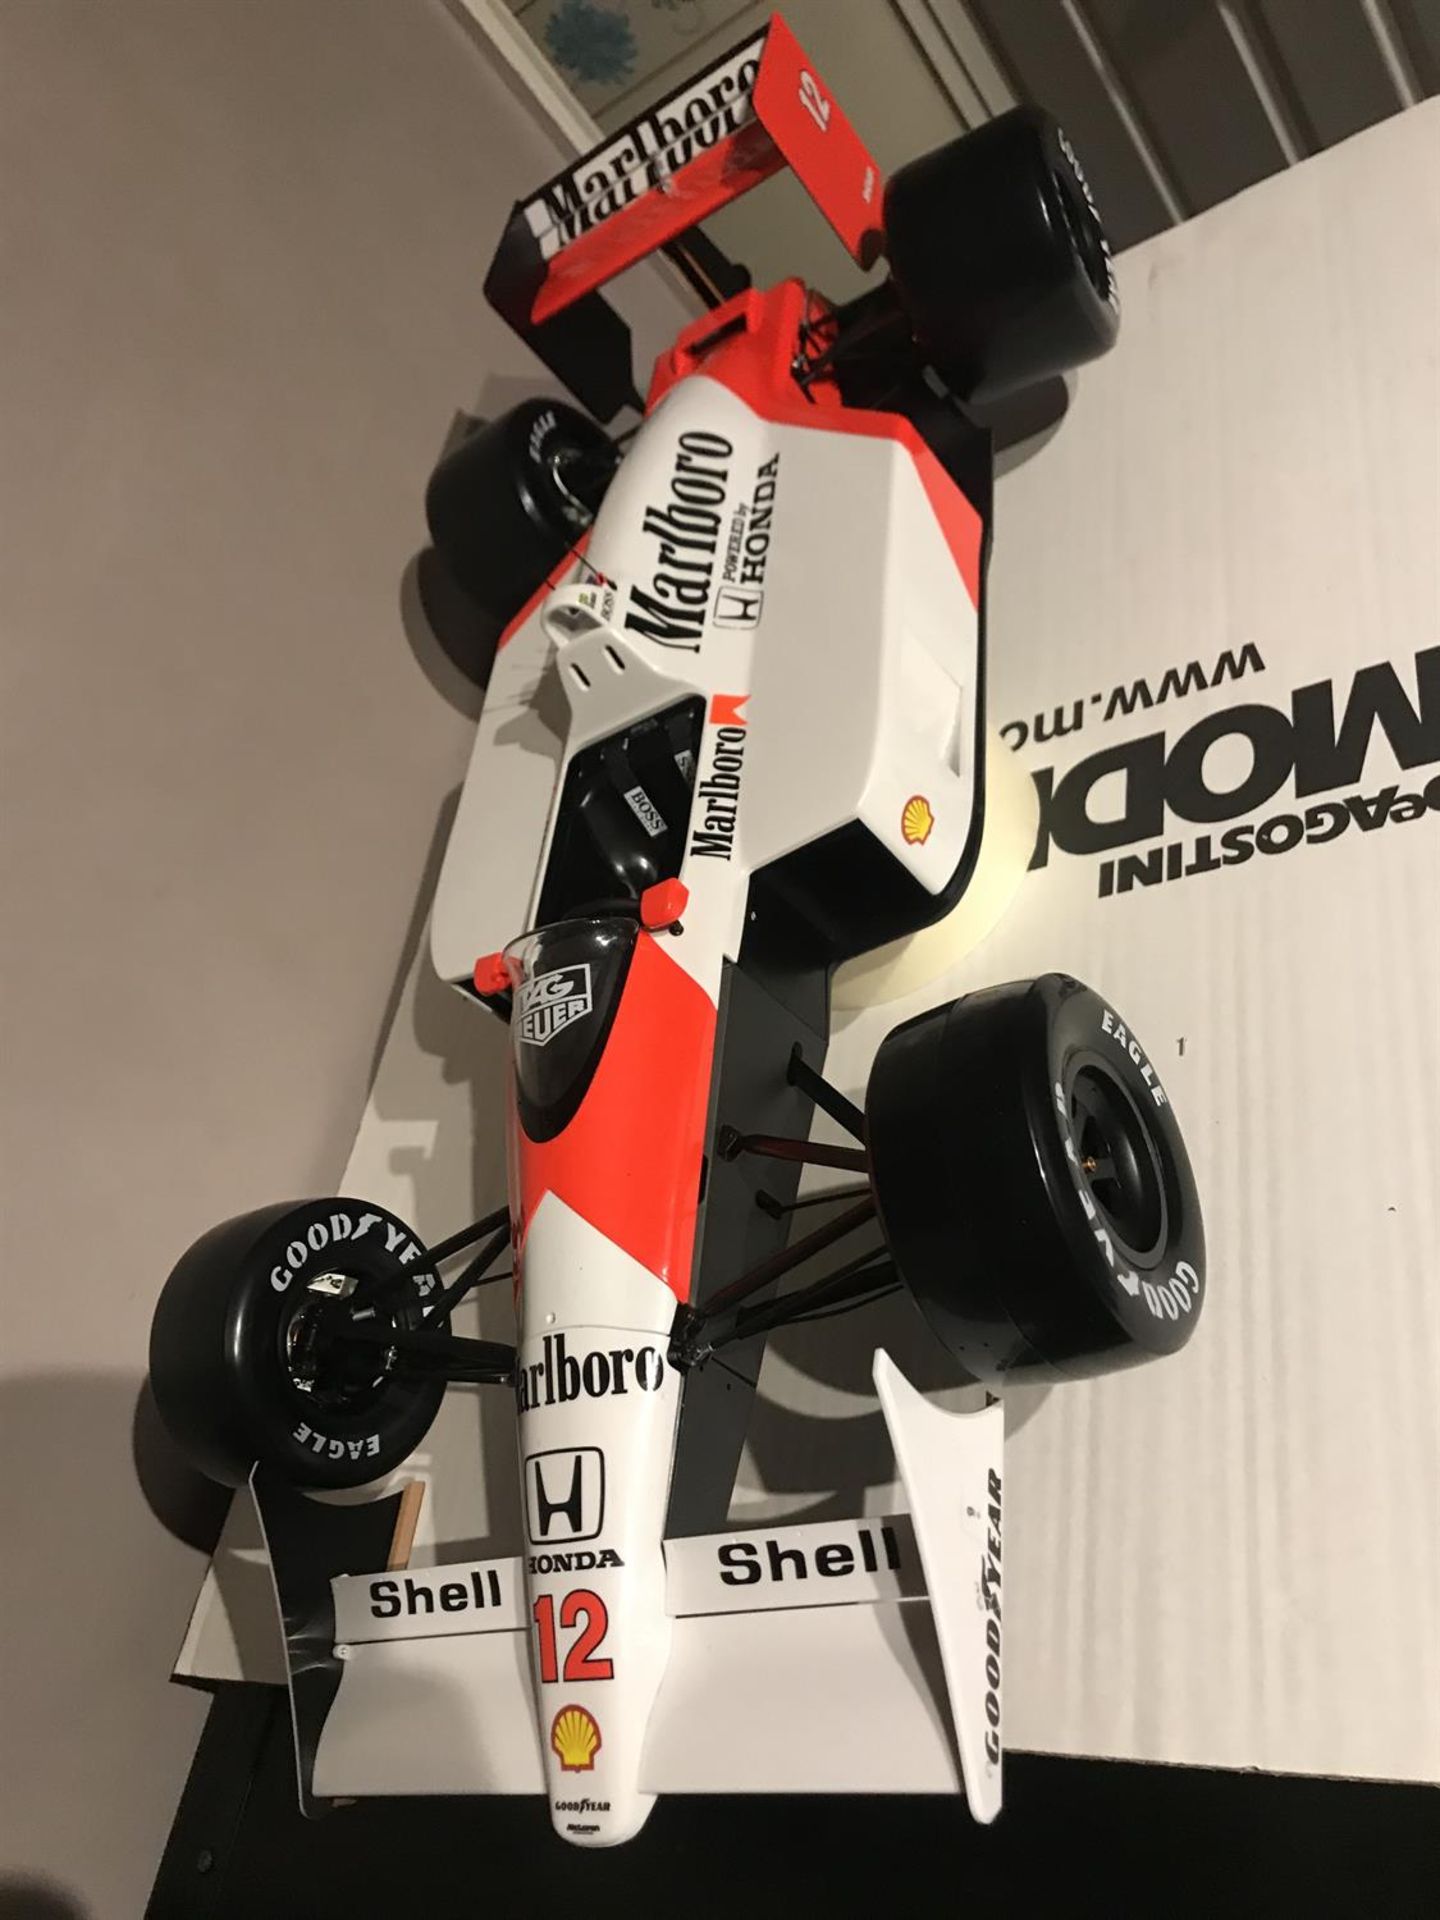 McLaren MP4/4 1:8th Scale Highly Detailed Kyosho DeAgostini Model with Display Case - Image 10 of 10